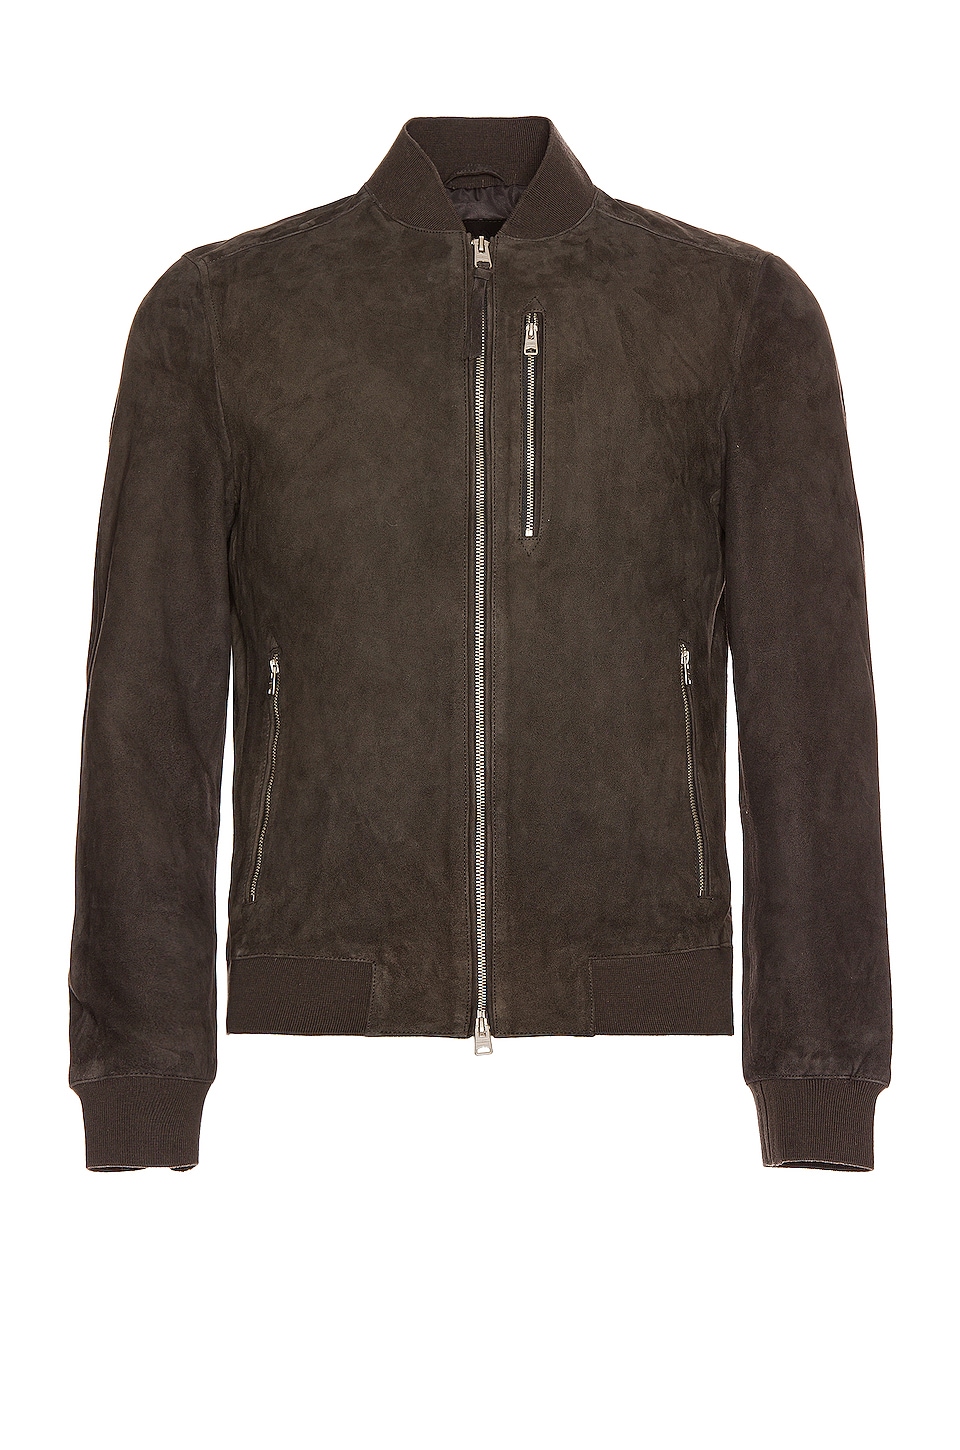 ALLSAINTS Kemble Suede Bomber in Soot Grey | REVOLVE